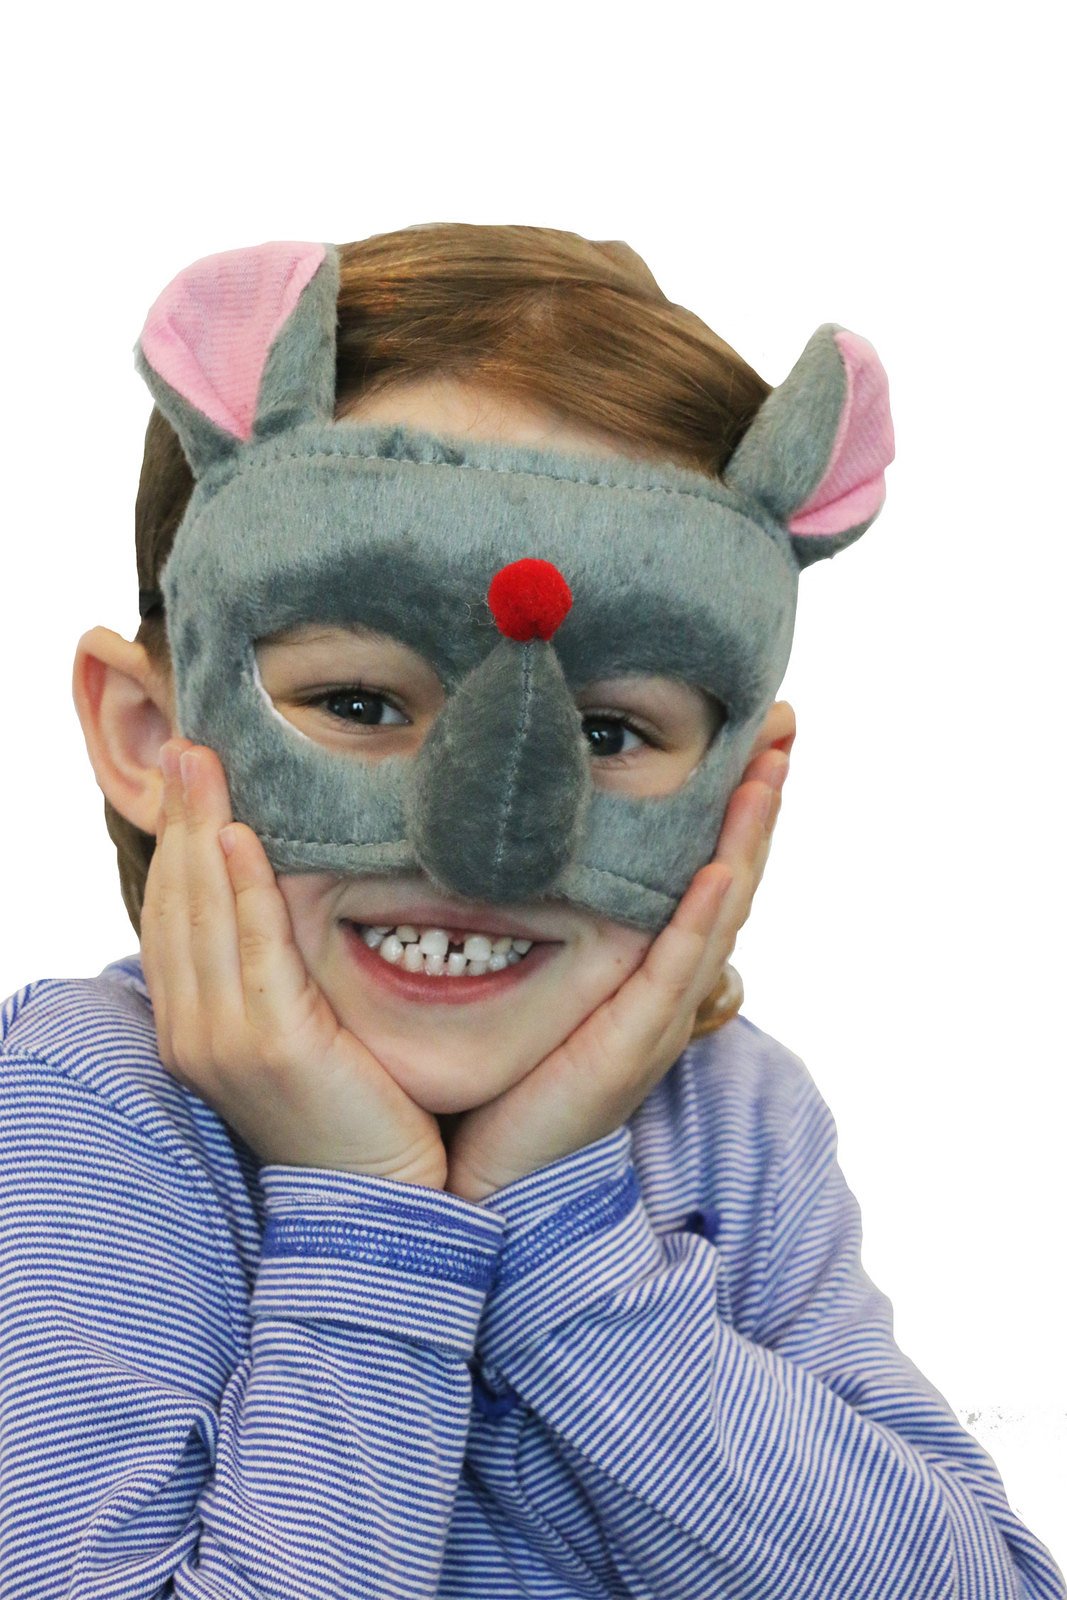 Animal Costume Mask Set Deluxe Mouse Grey